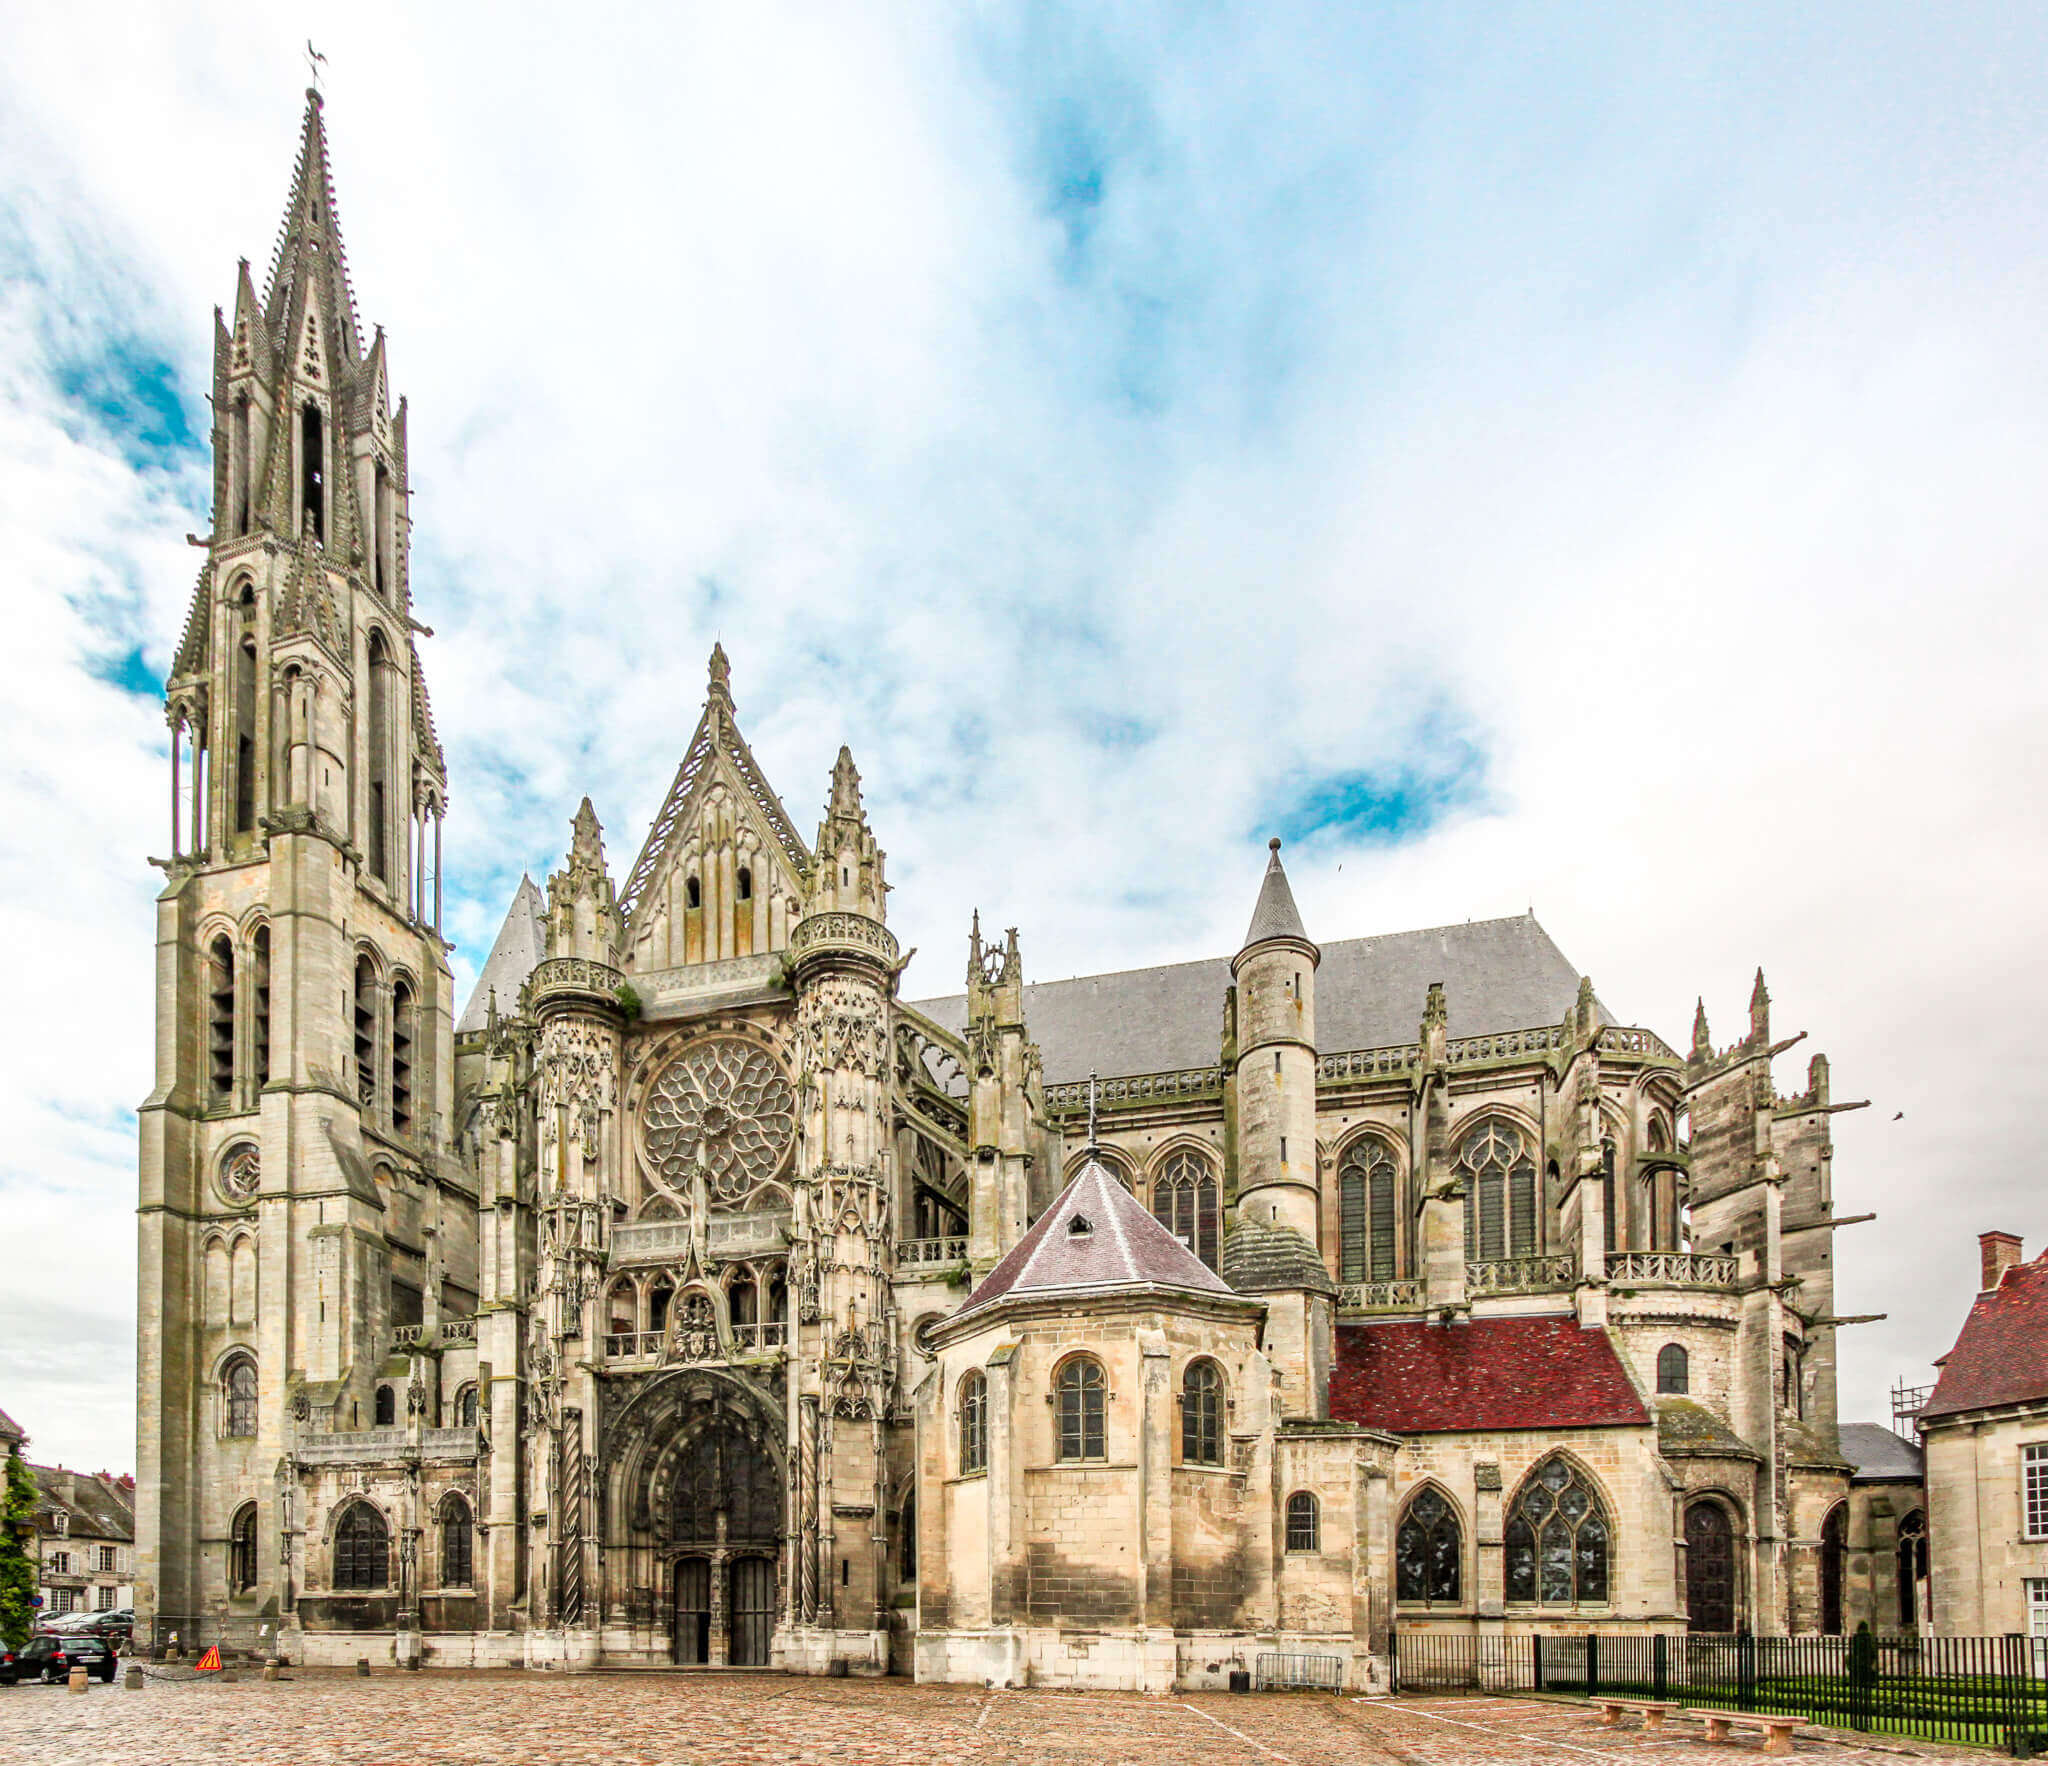 The exterior of the Senlis Cathedral